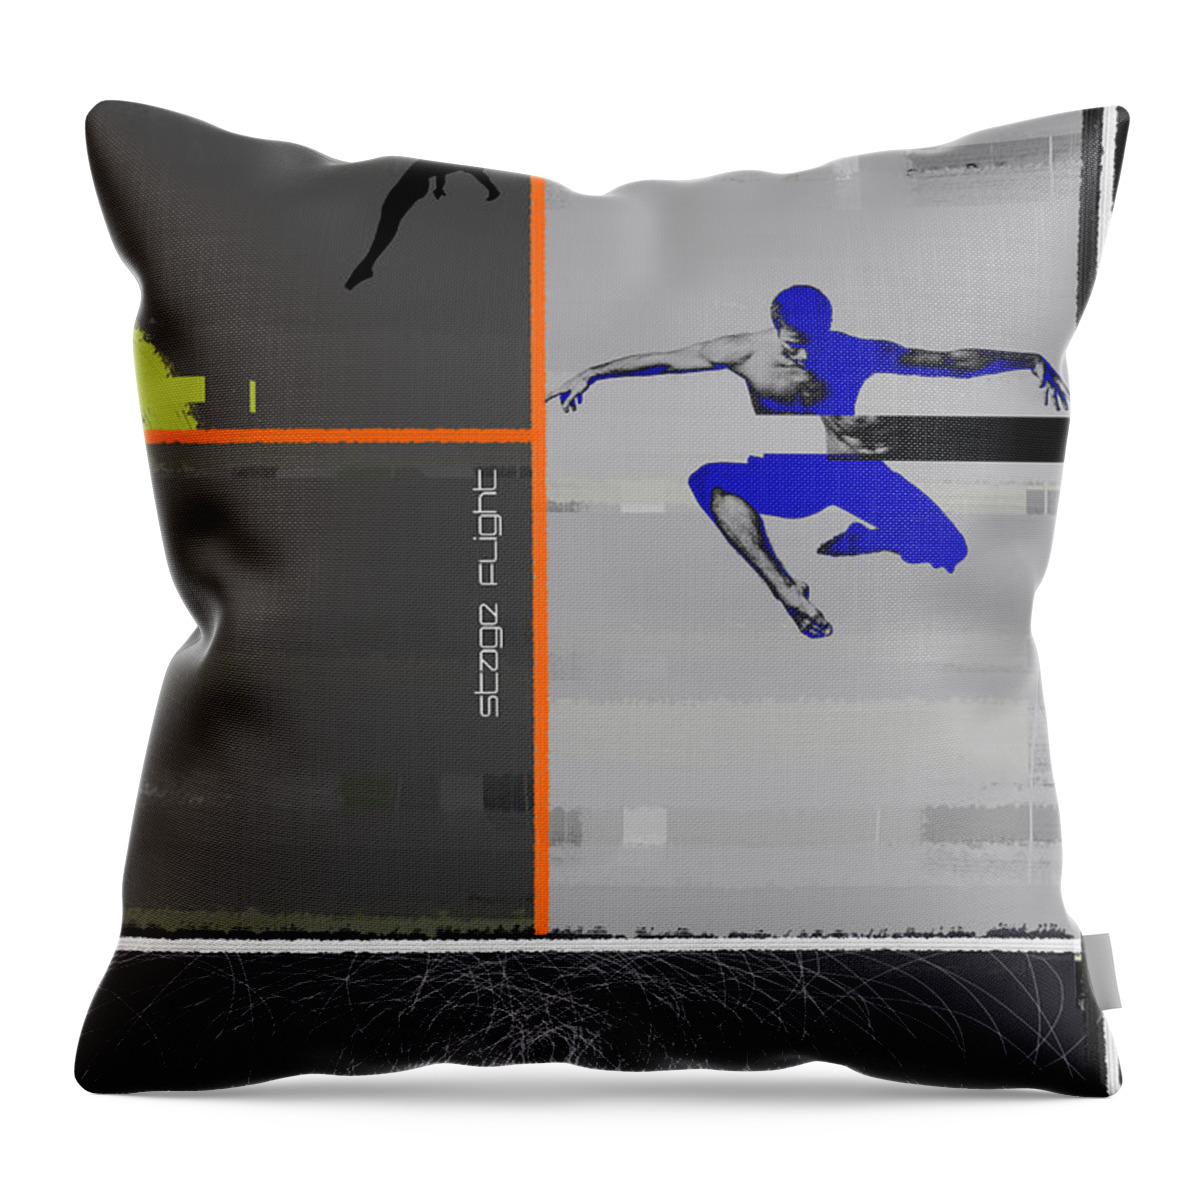 Dancer Throw Pillow featuring the painting Stage Flight by Naxart Studio